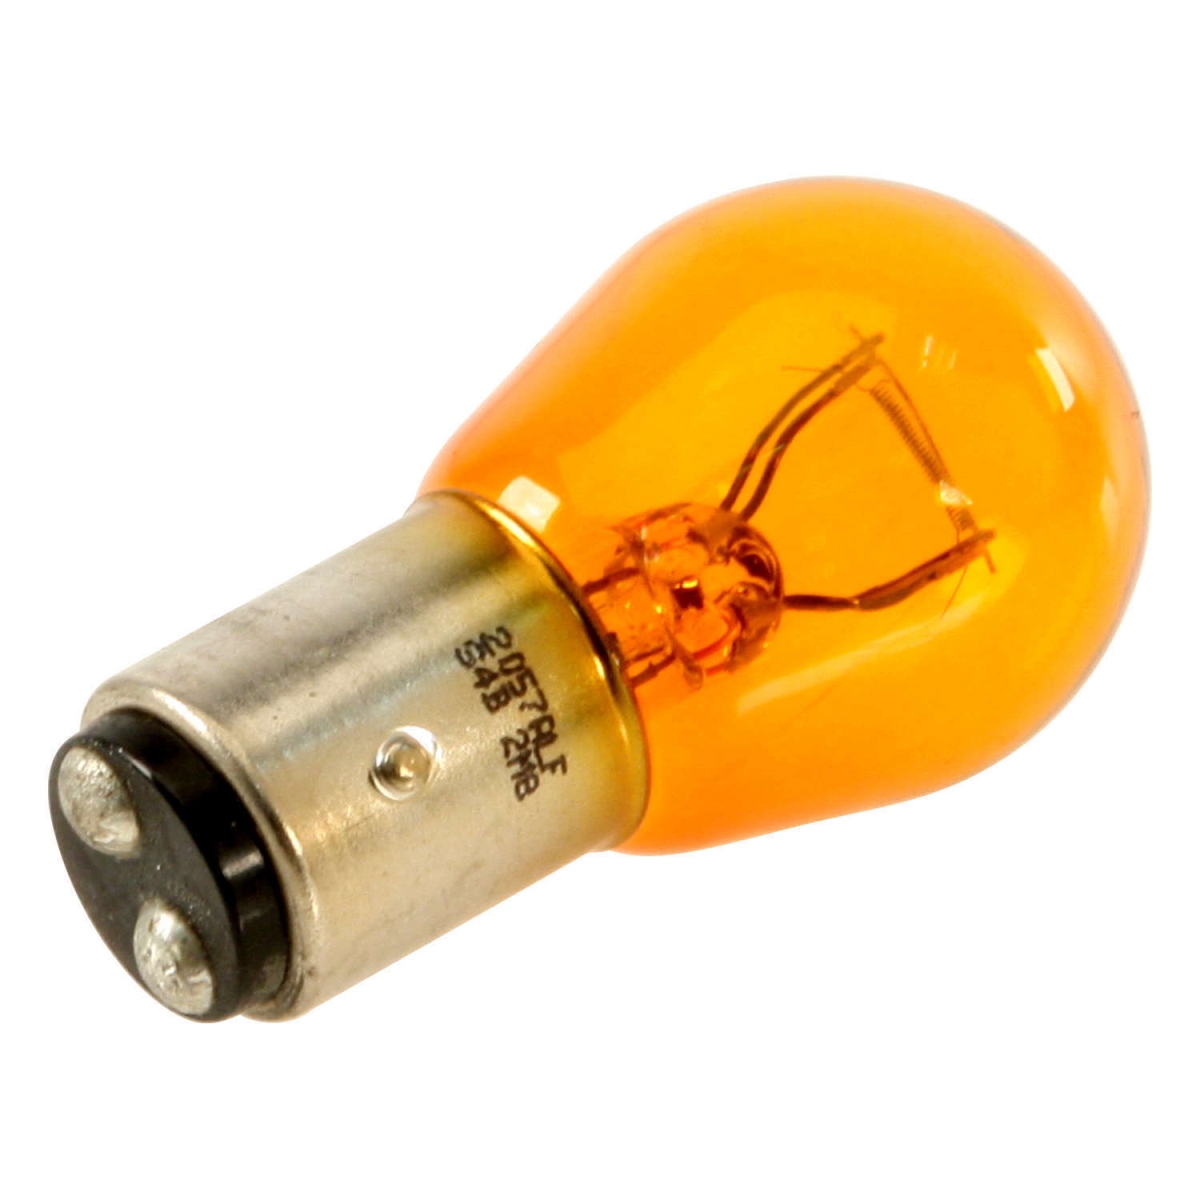 Picture of Sylvania 2057ABP2 Miniature Halogen Bulb - Pack of 2